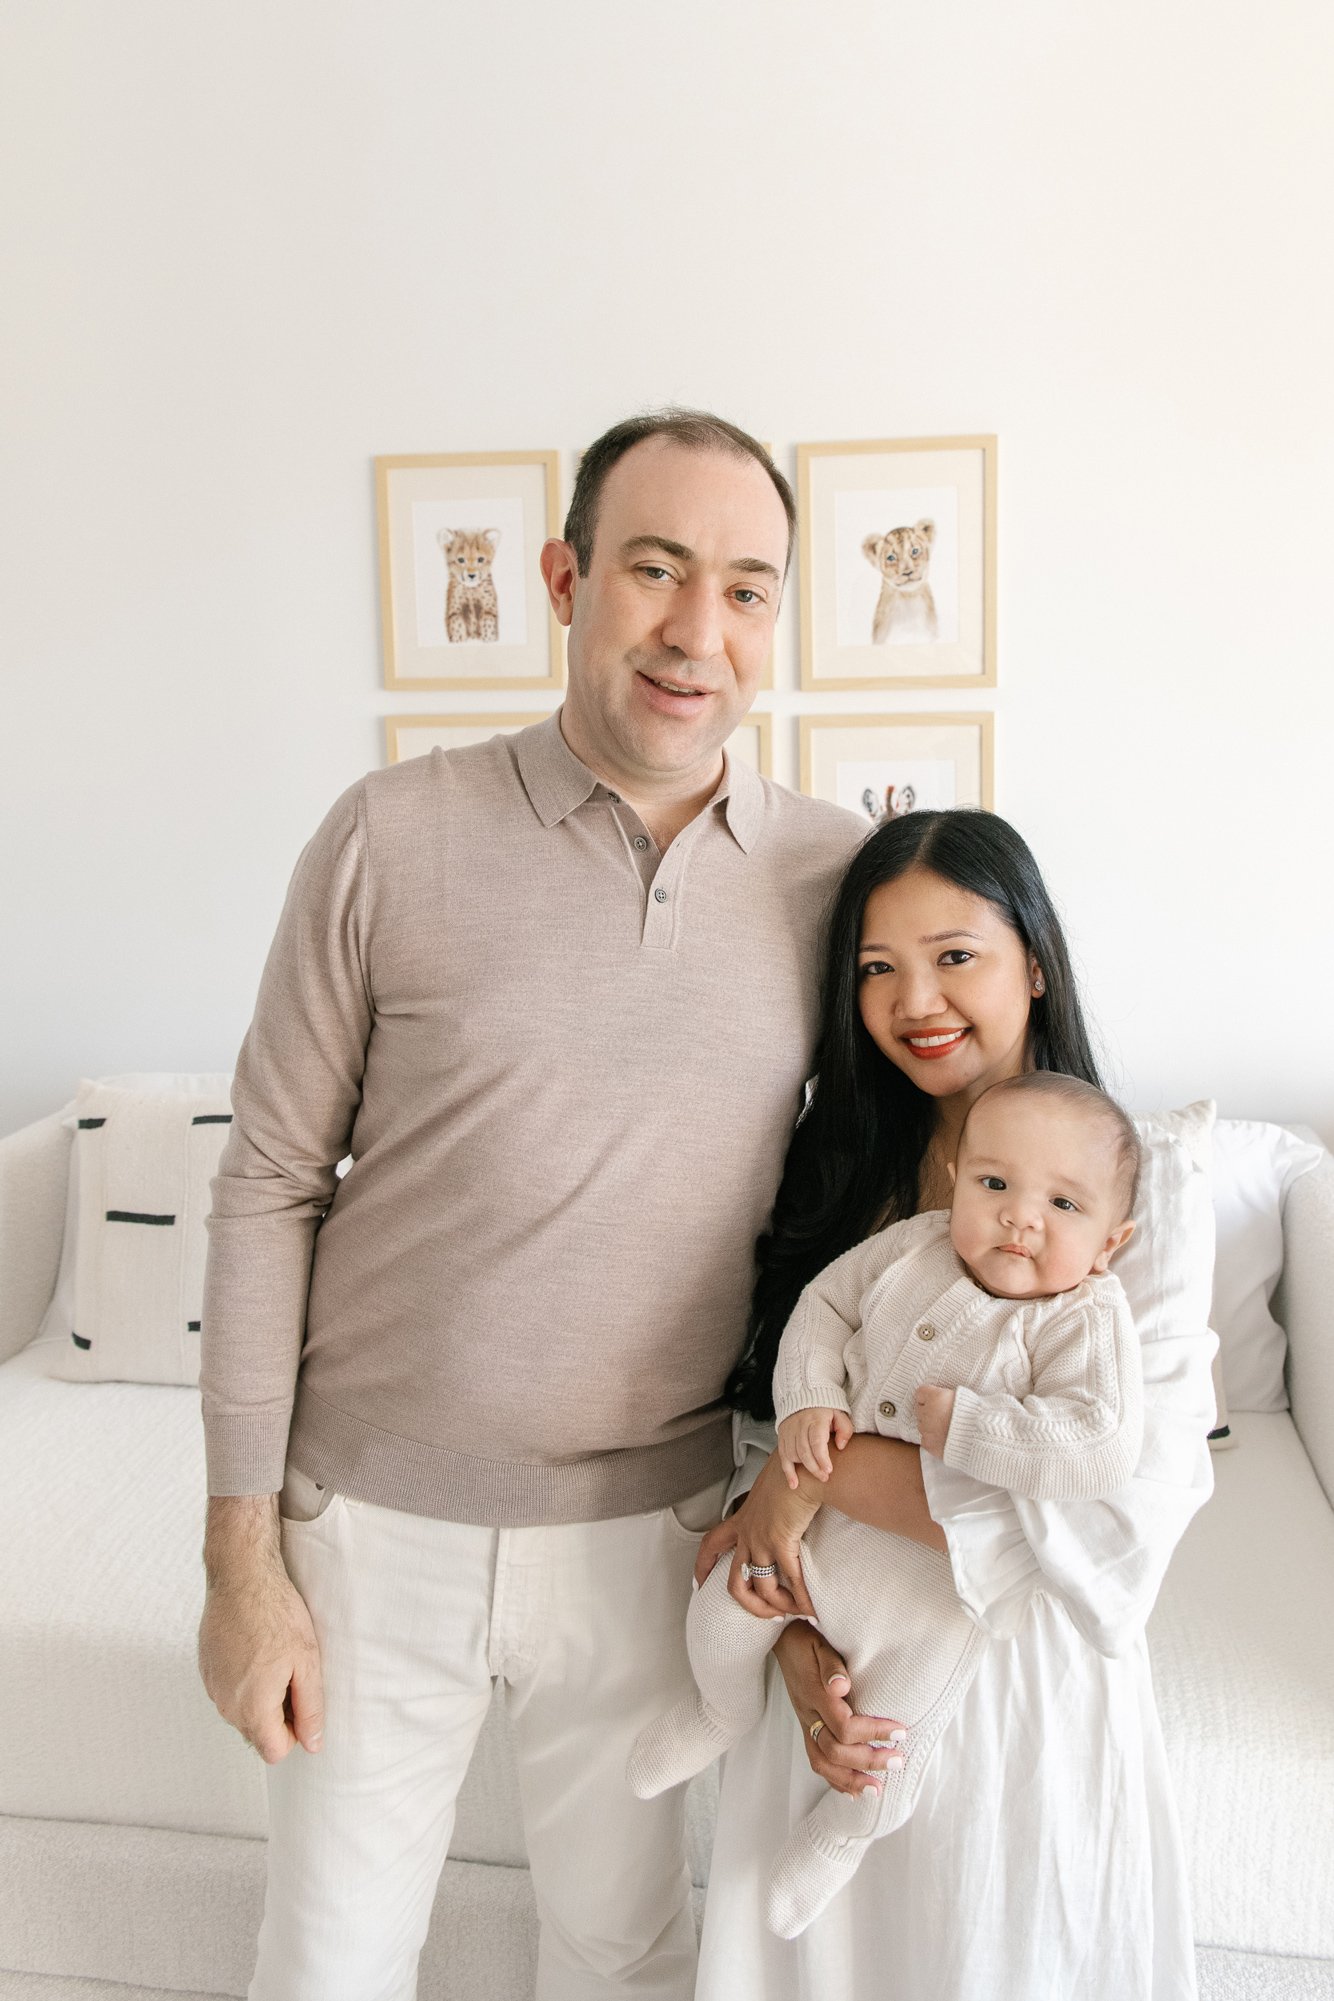  Modern timeless family portrait with a newborn baby in the nursery by Nicole Hawkins Photography. clean family portrait #NicoleHawkinsPhotography #InHomeNewborns #NurseryNewborns #NYCbabyphotography #babyportraits #ZooNursery #familyportraits 